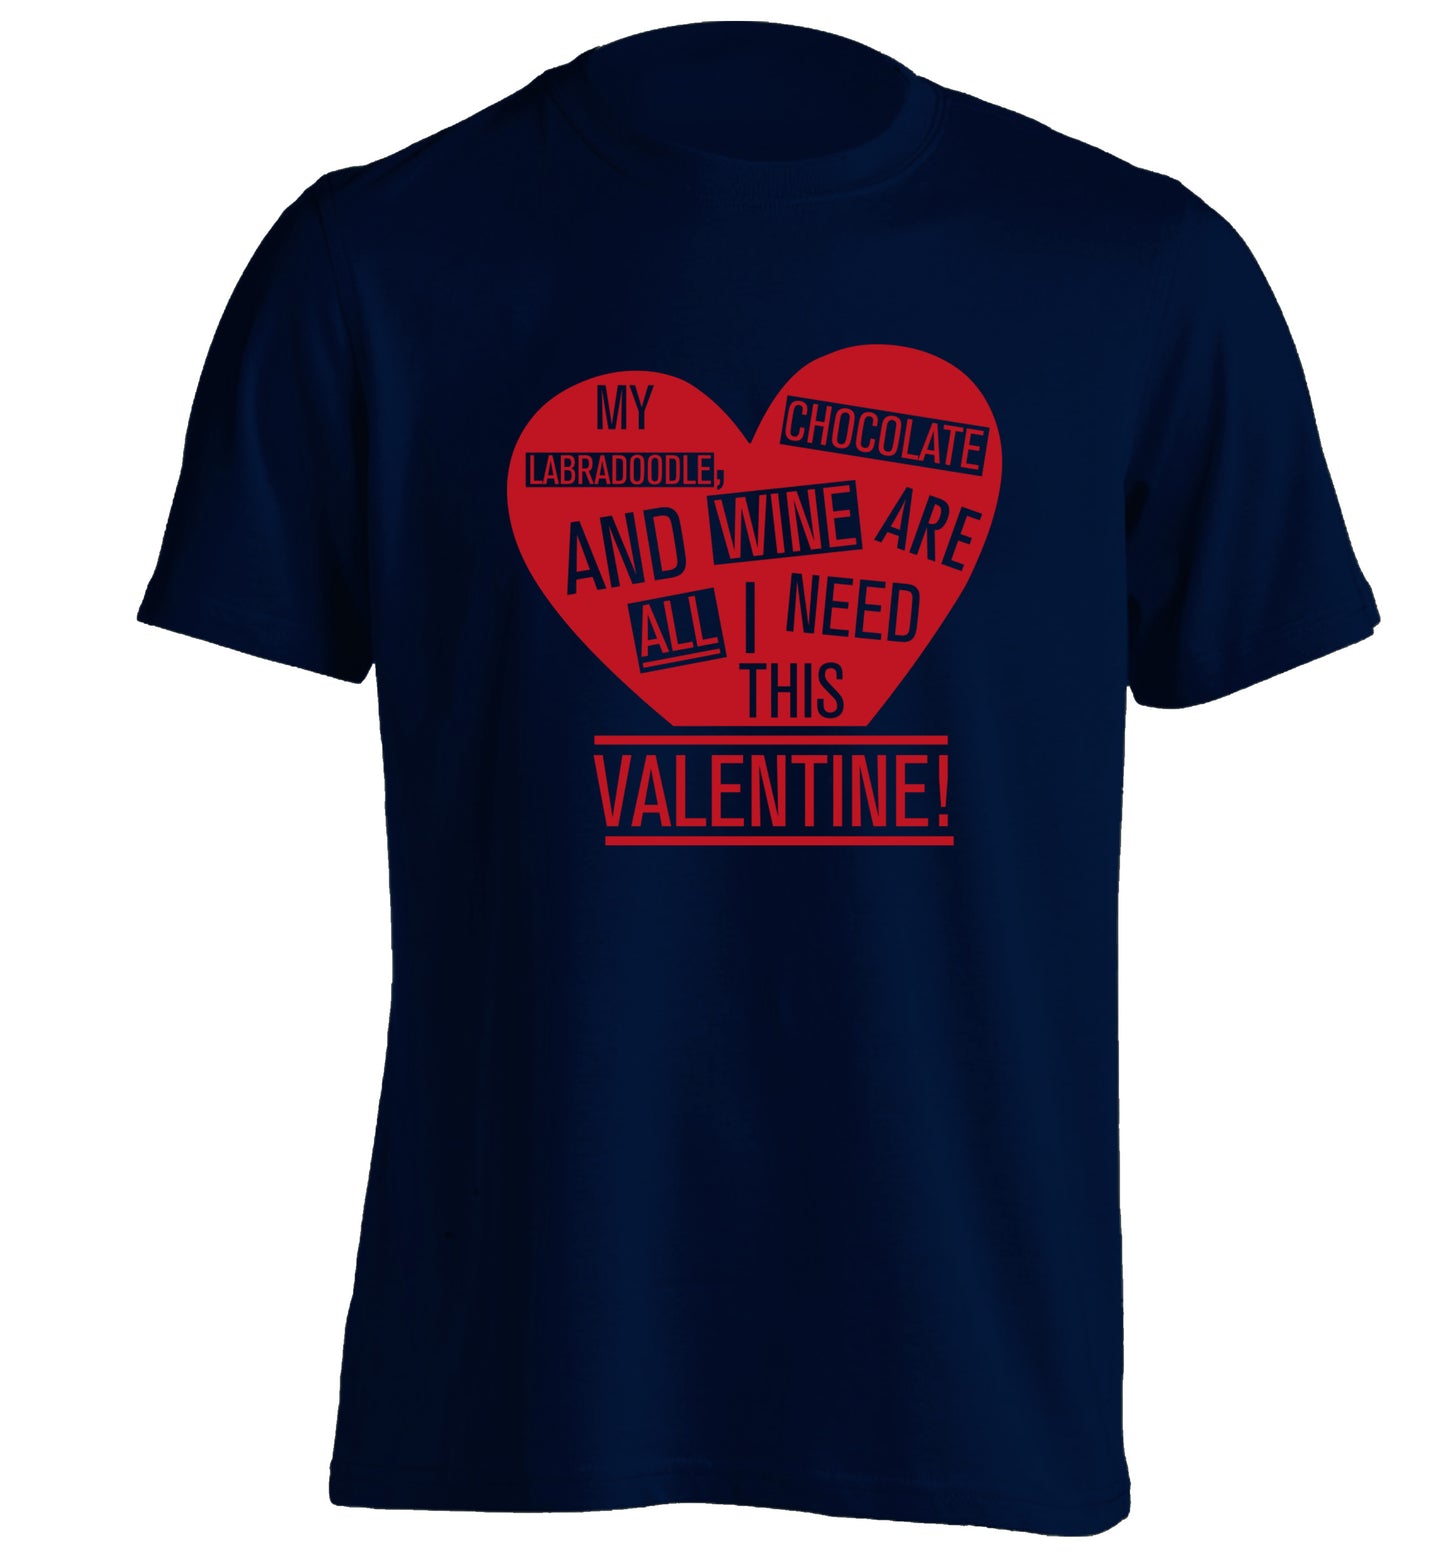 My labradoodle, chocolate and wine are all I need this valentine! adults unisex navy Tshirt 2XL